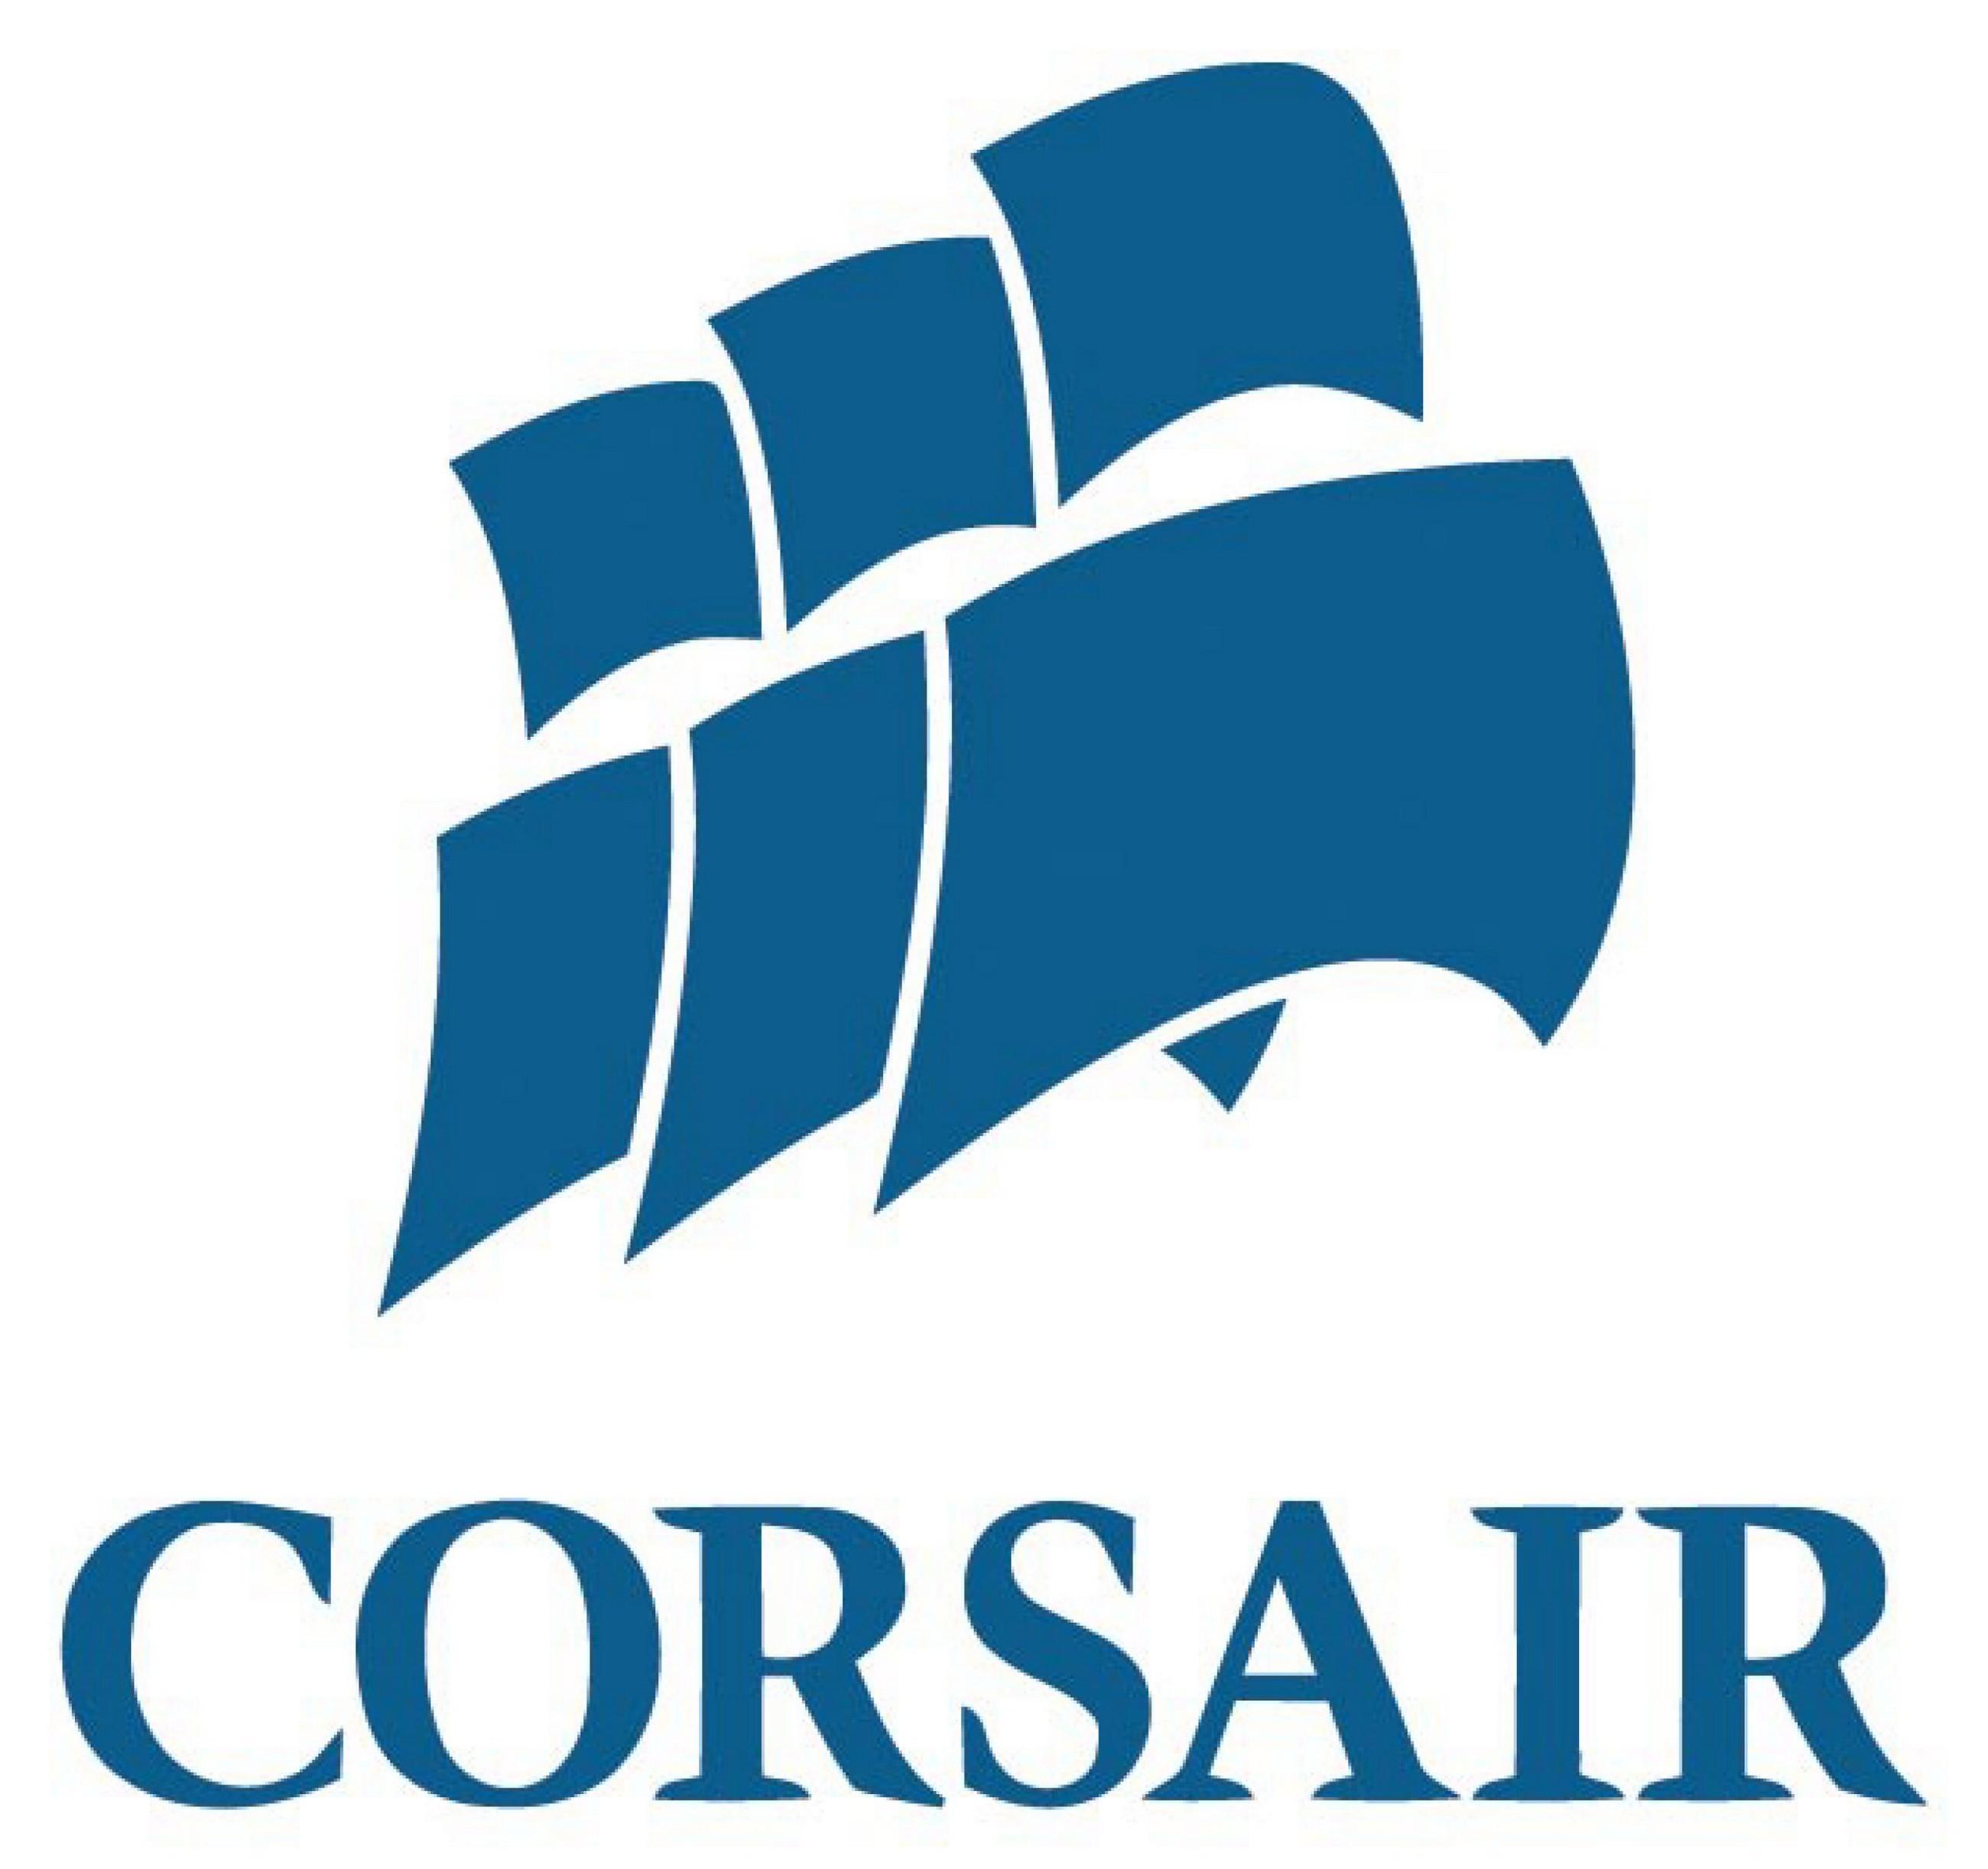 Founded In 1994, Corsair Is A Manufacturer Of Award Winning Products Including Ddr3 Memory Upgrades, Usb Flash Drives, Power Supply Units, Solid State Hdpng.com  - Corsair Eps, Transparent background PNG HD thumbnail